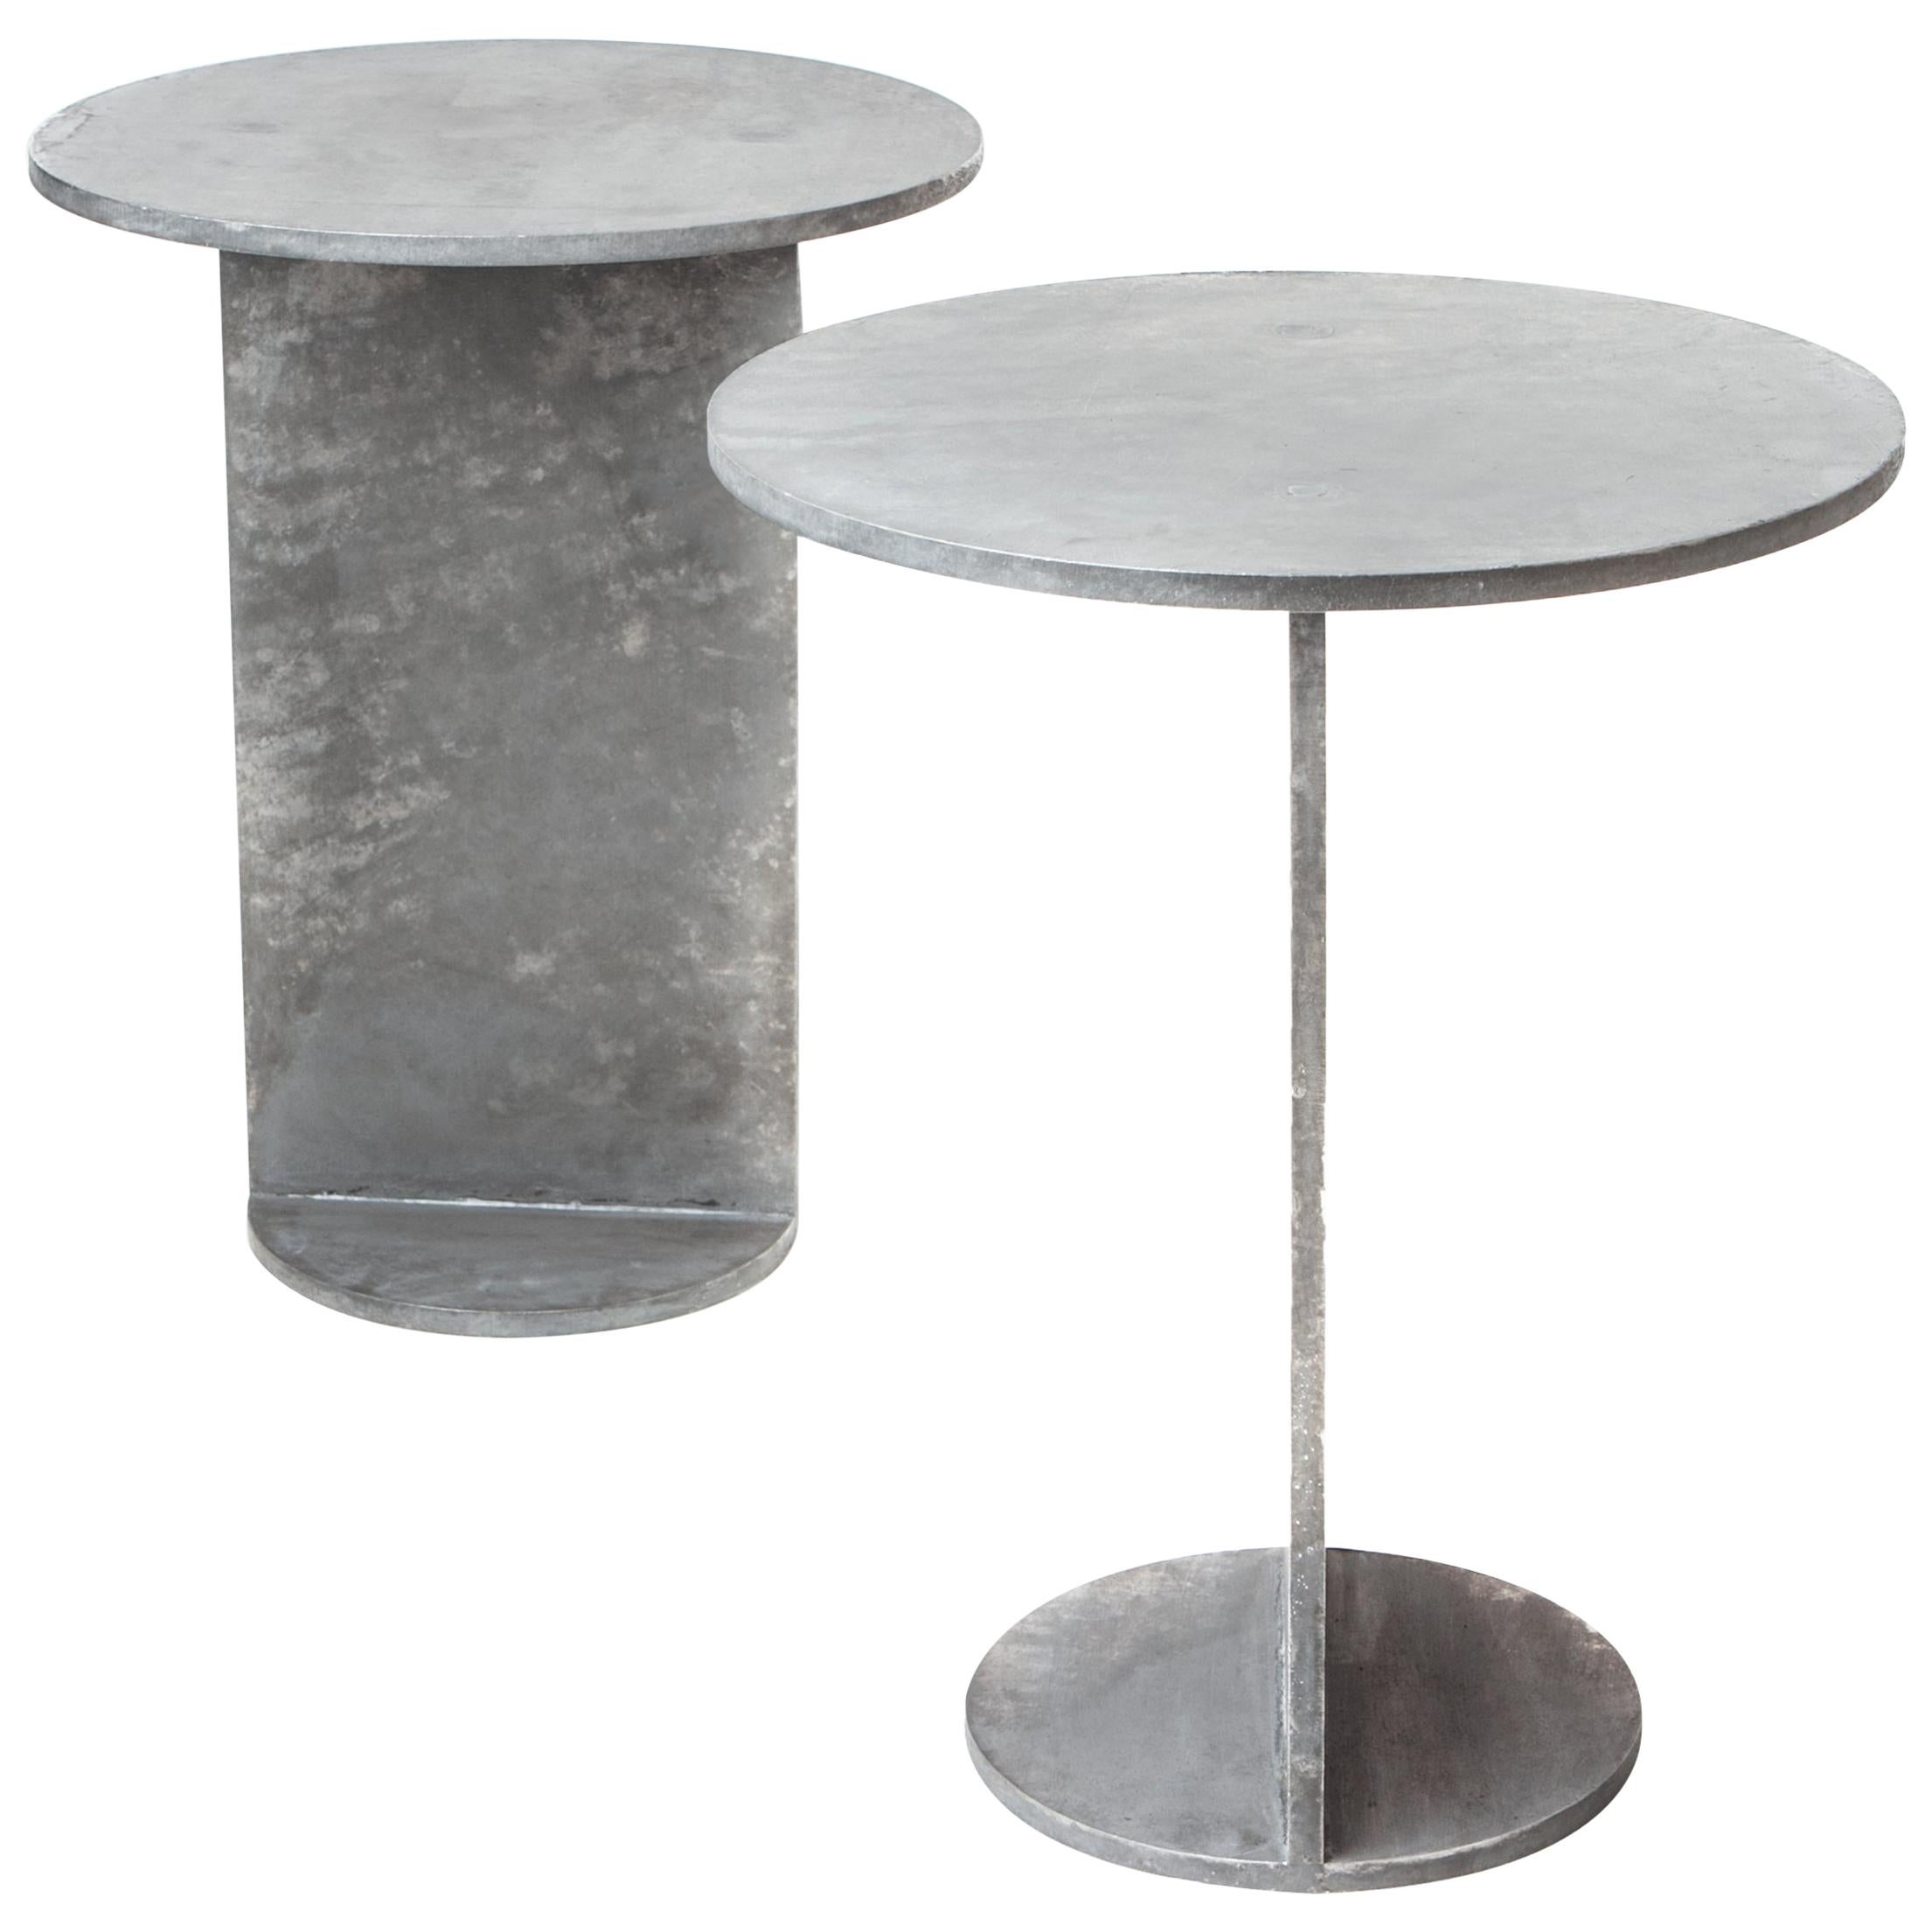 Pair of Eero Tables in Hot-Dipped Galvanized Steel Plate by Jonathan Nesci